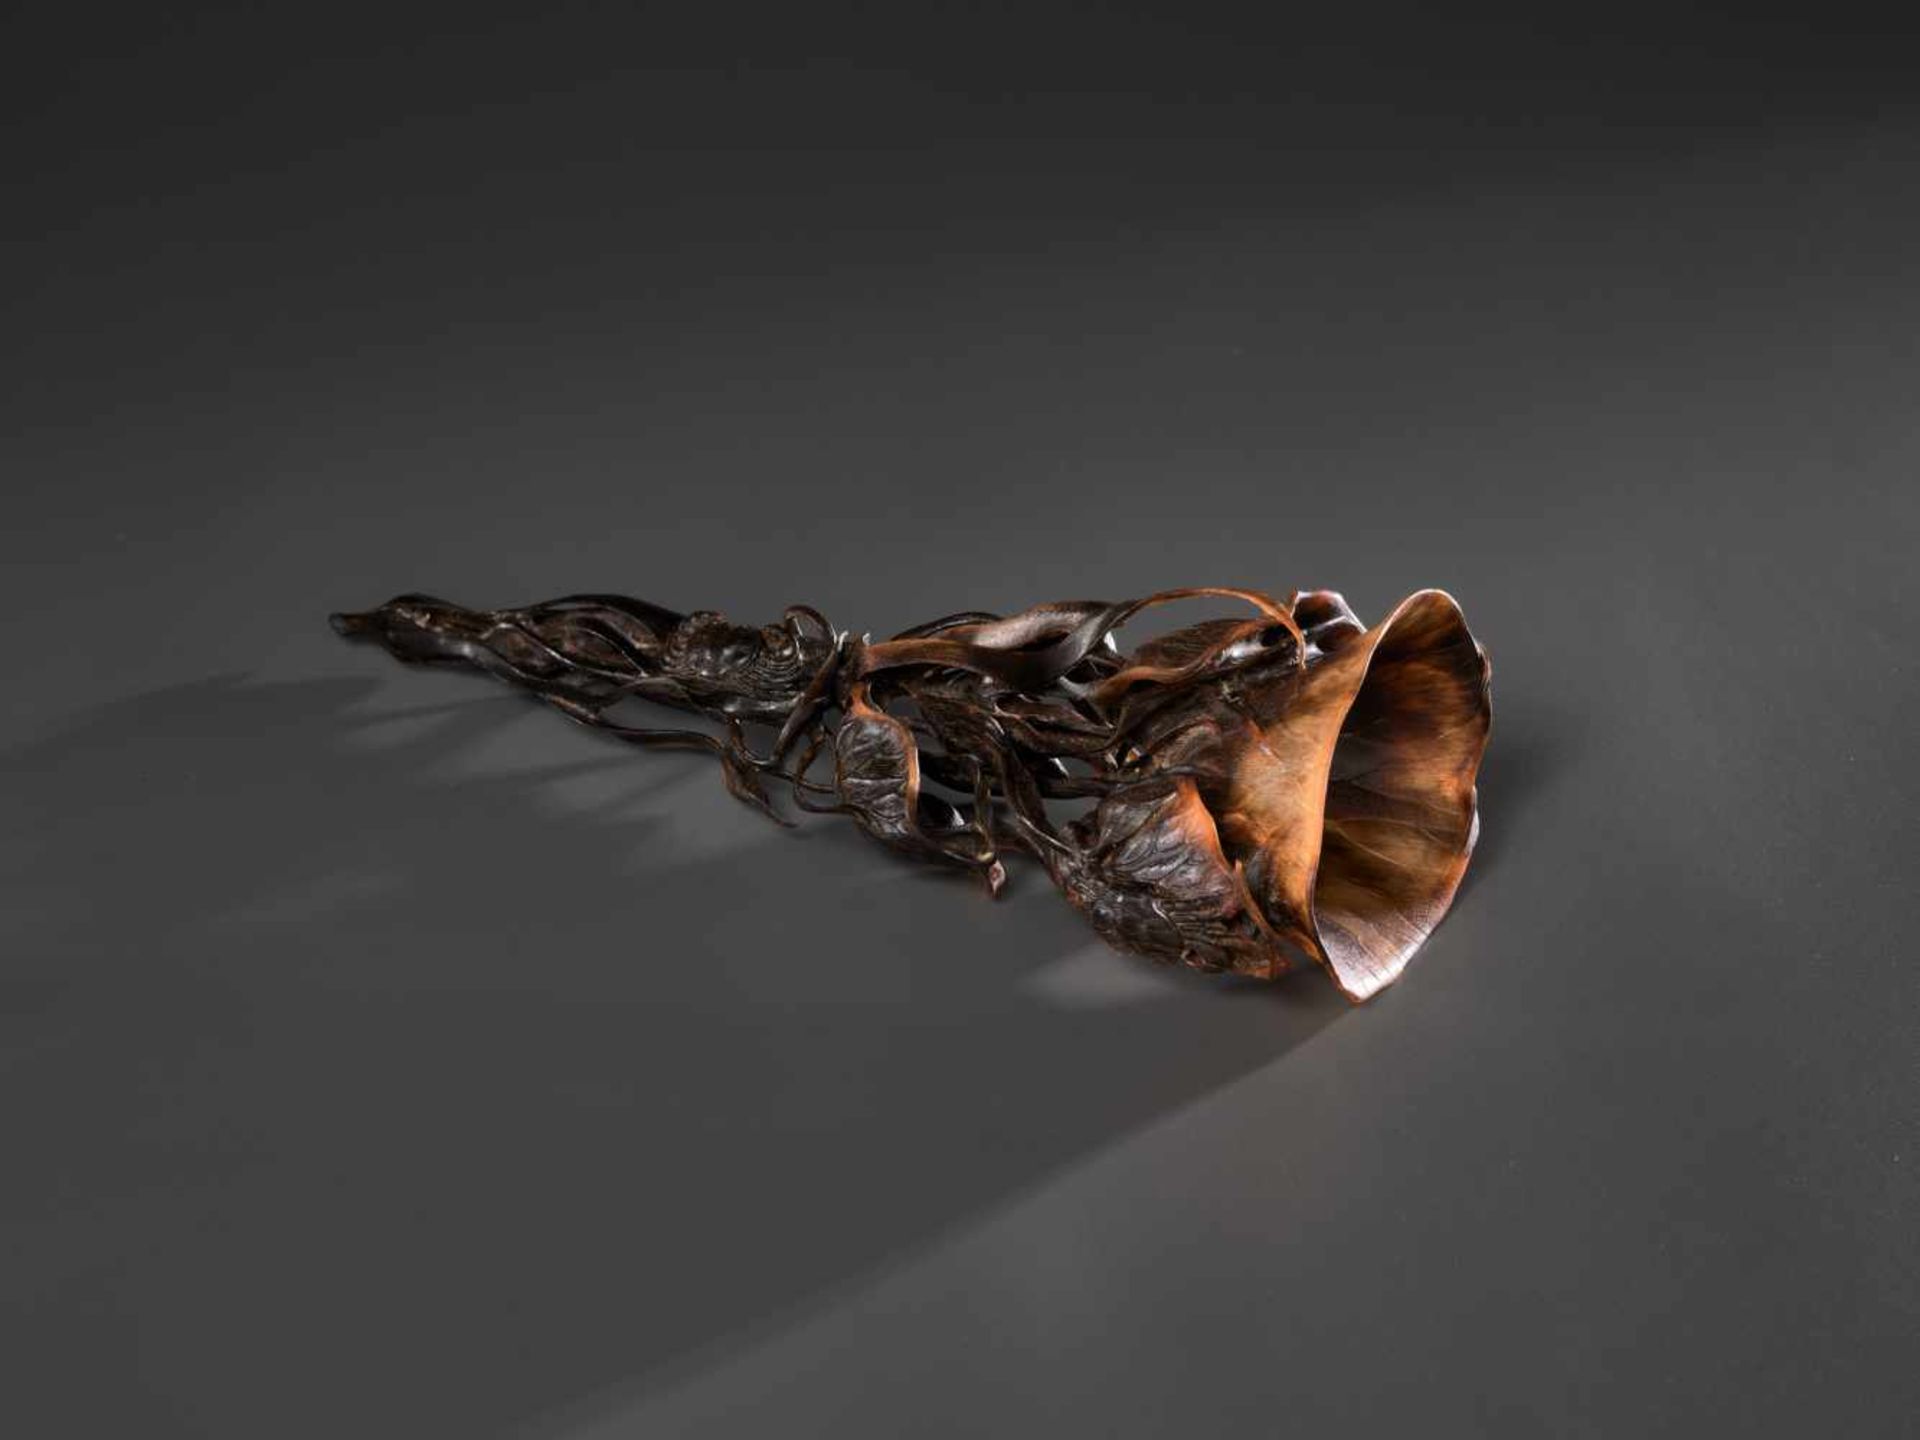 AN 18TH CENTURY RETICULATED FULL TIP RHINOCEROS ‘LOTUS’ CUP Rhinoceros horn in a deep brown to light - Bild 5 aus 9